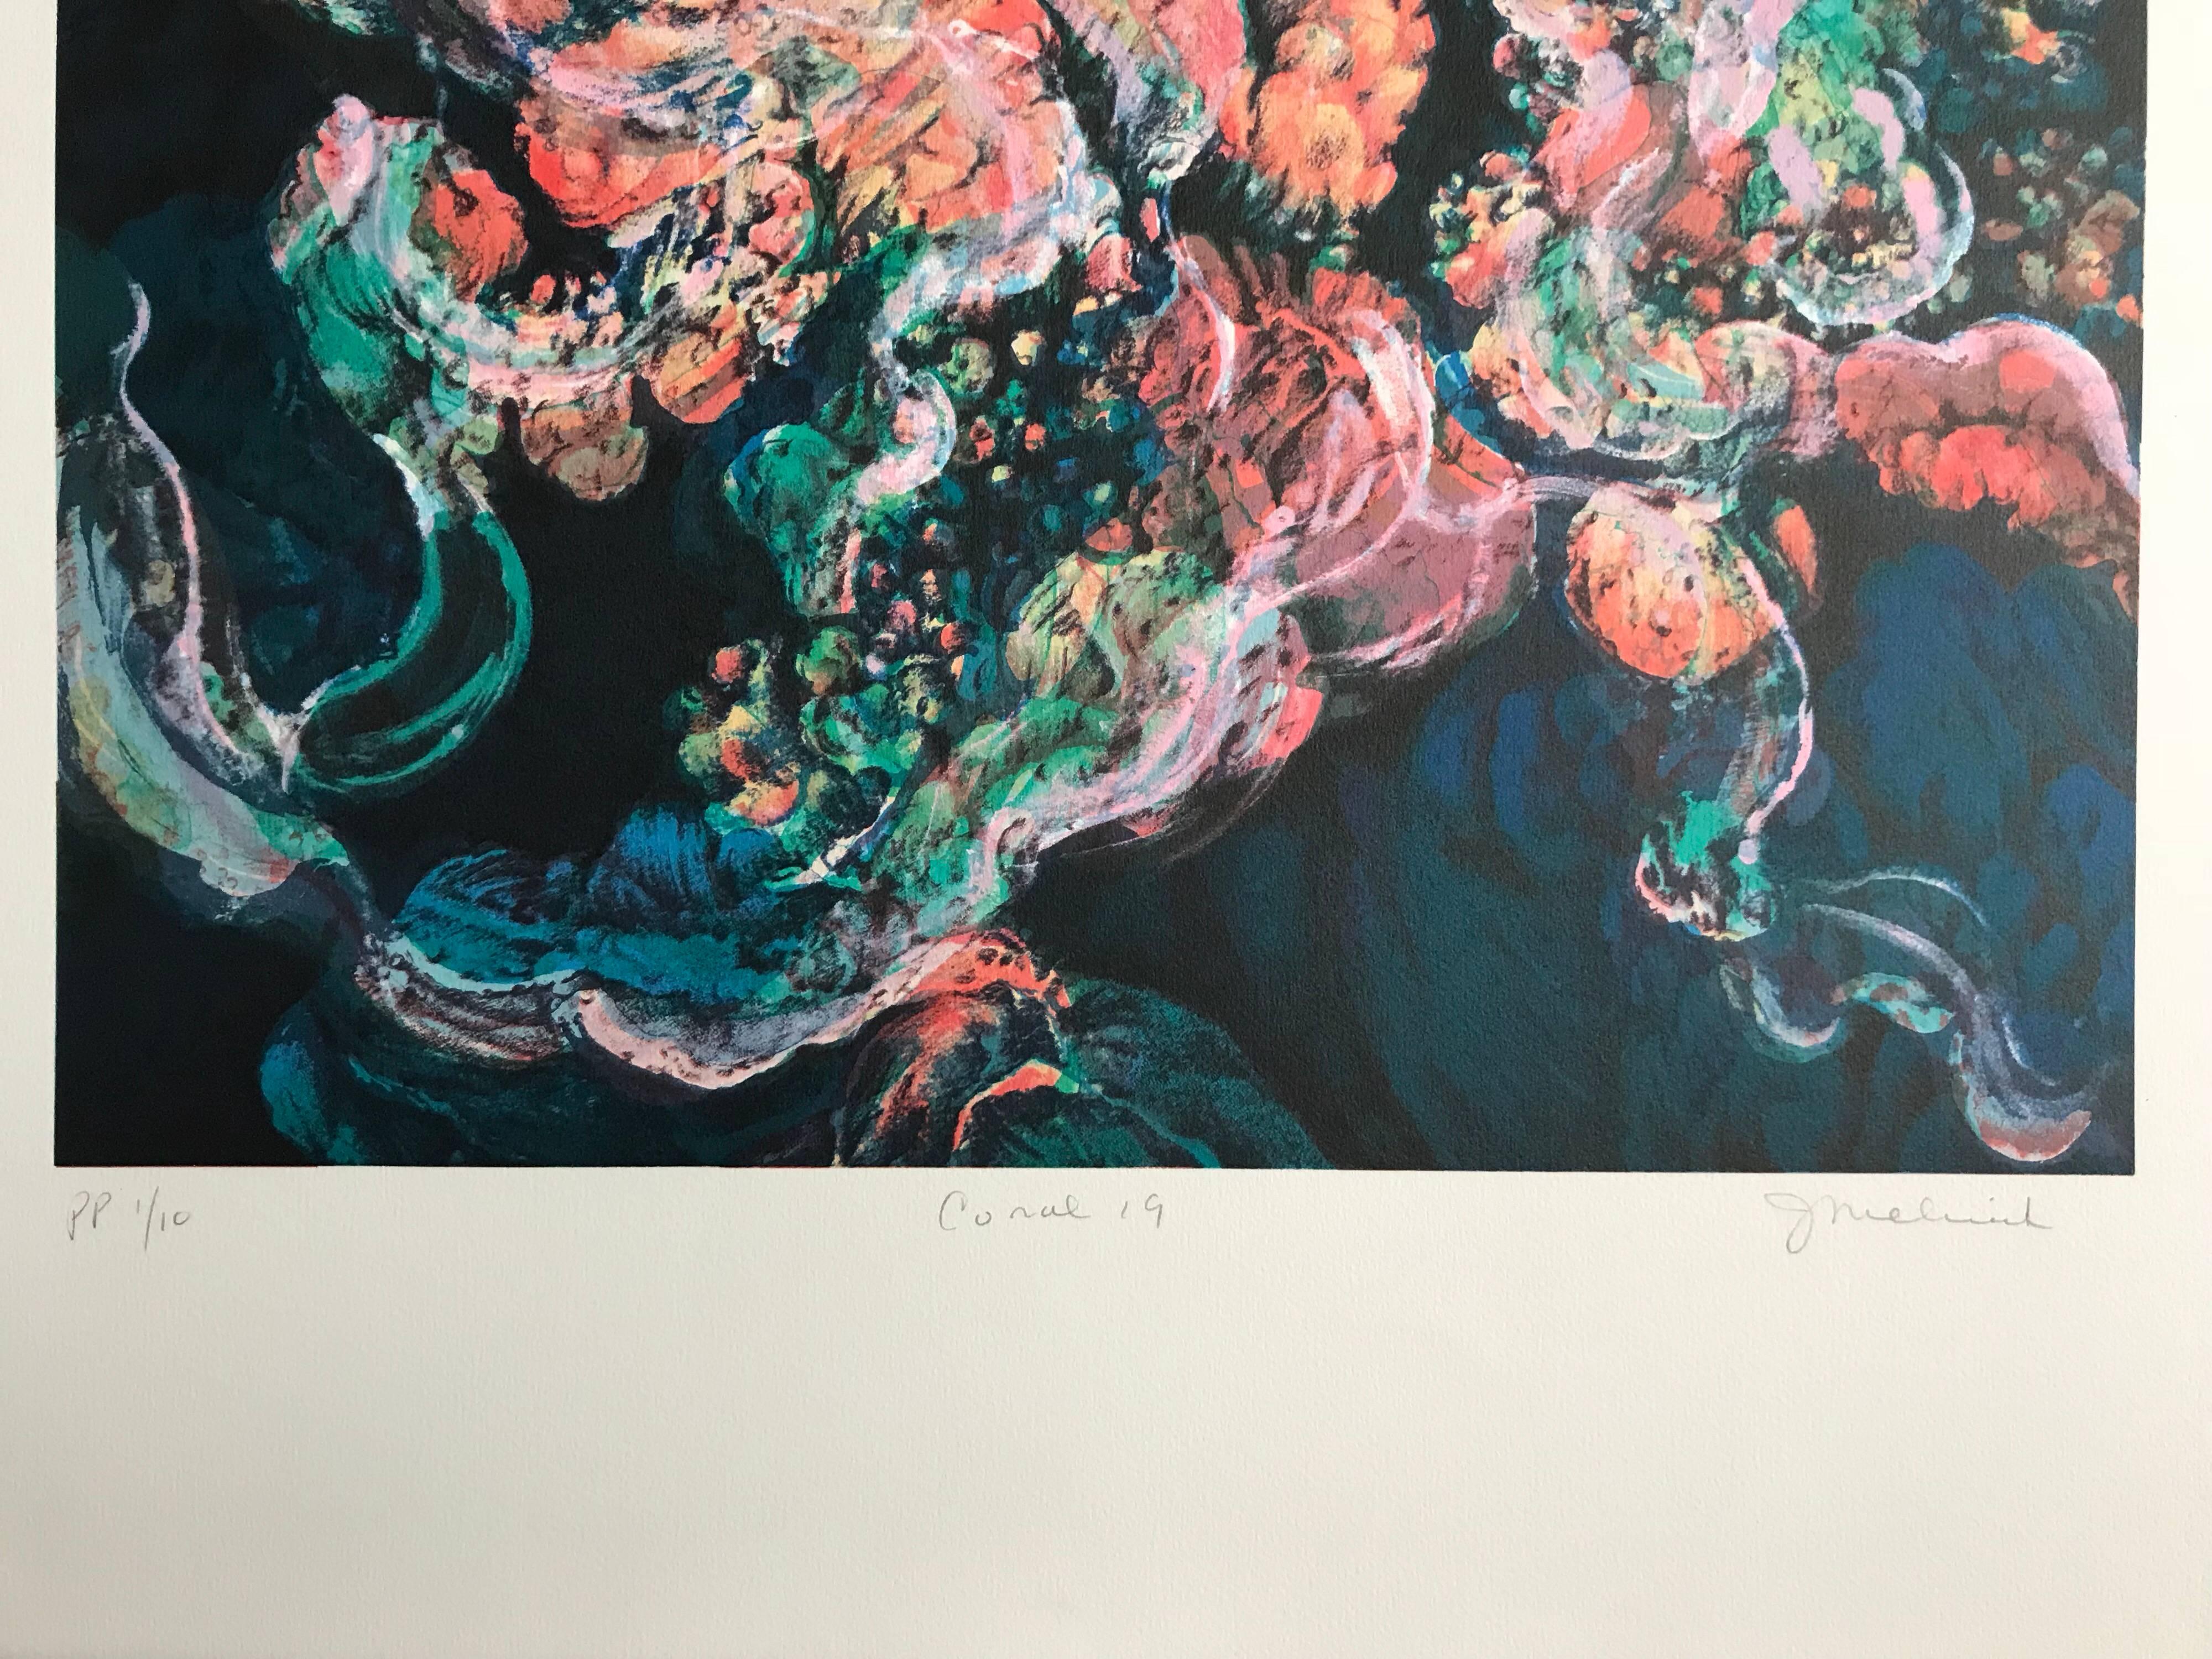 Coral 19:Coral Pink, Blue Green, Signed Lithograph, Nature Abstract Coral Reef - Contemporary Print by Joan Melnick